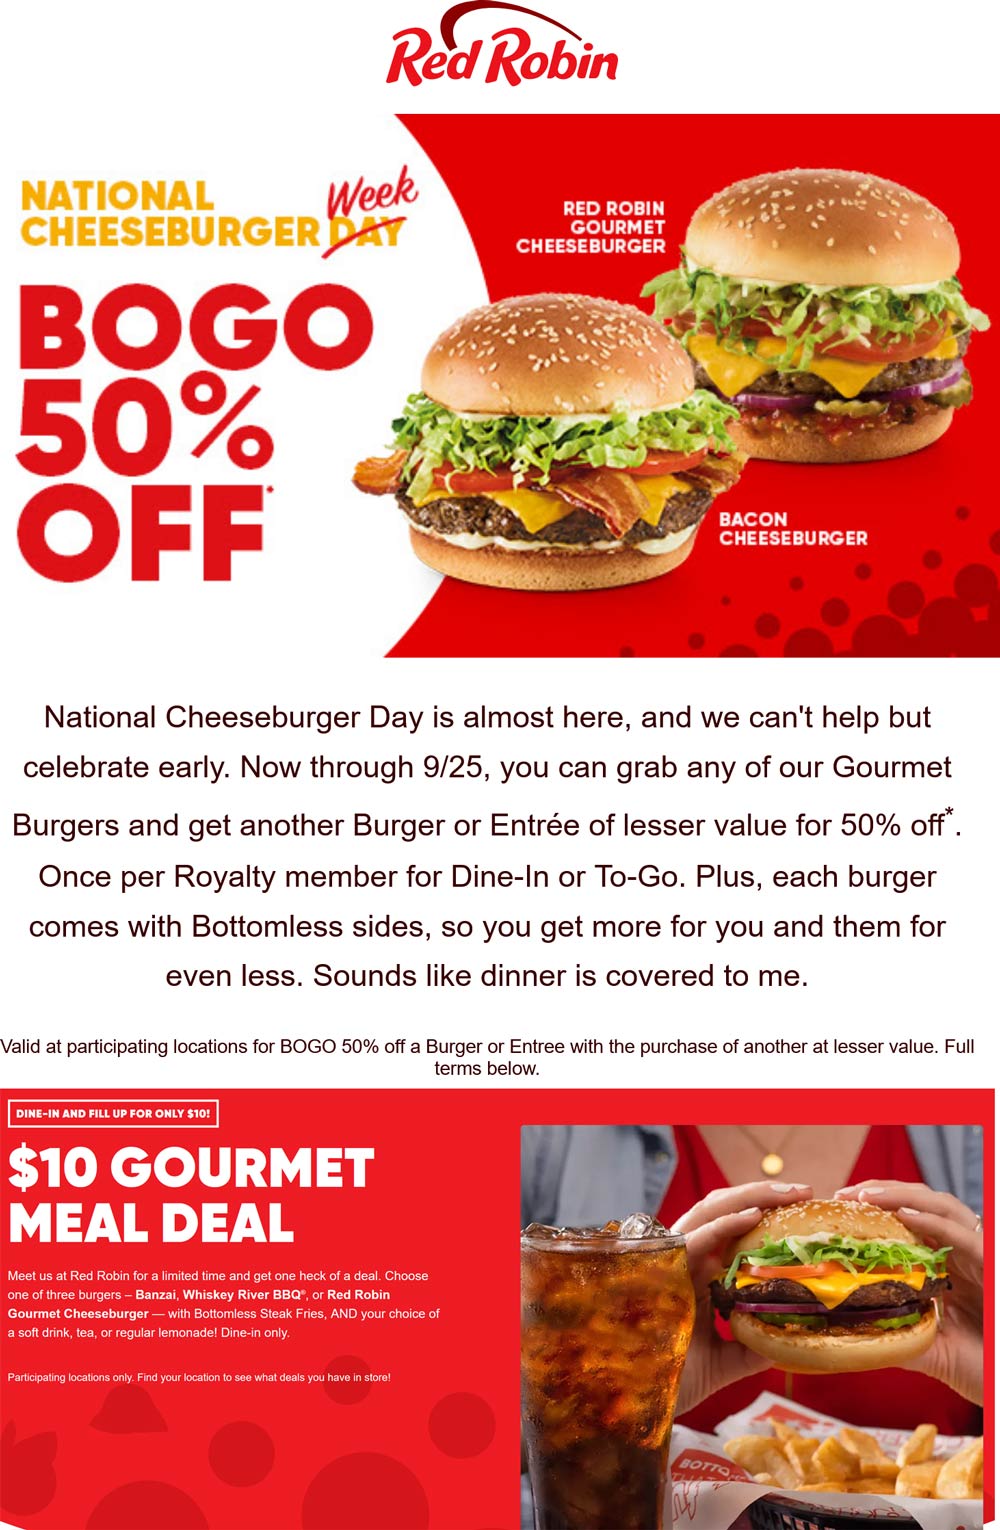 Red Robin restaurants Coupon  Second cheeseburger 50% off at Red Robin #redrobin 